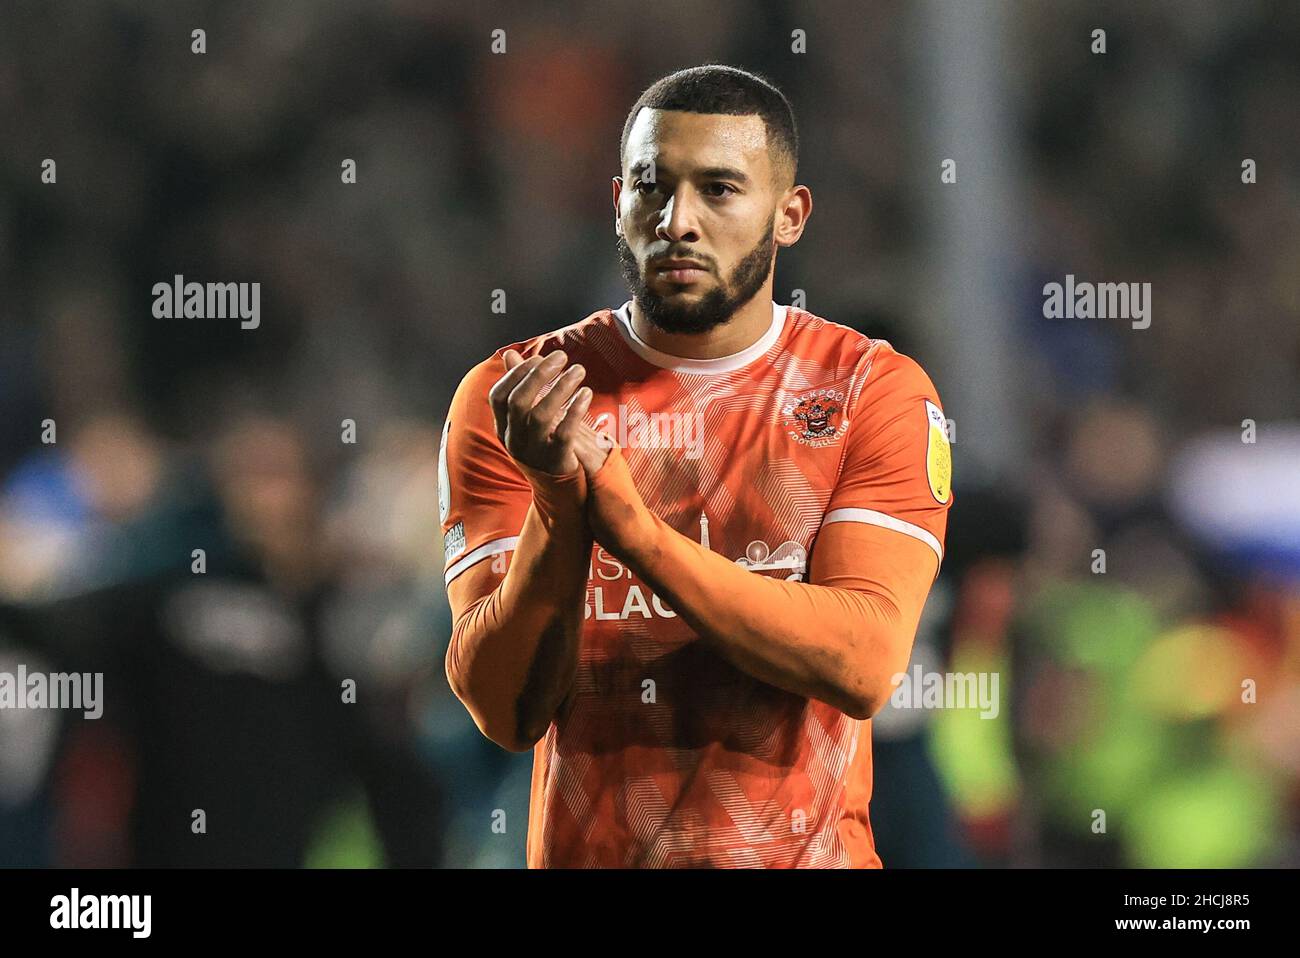 Keshi Anderson #10 of Blackpool applauds the fans Stock Photo